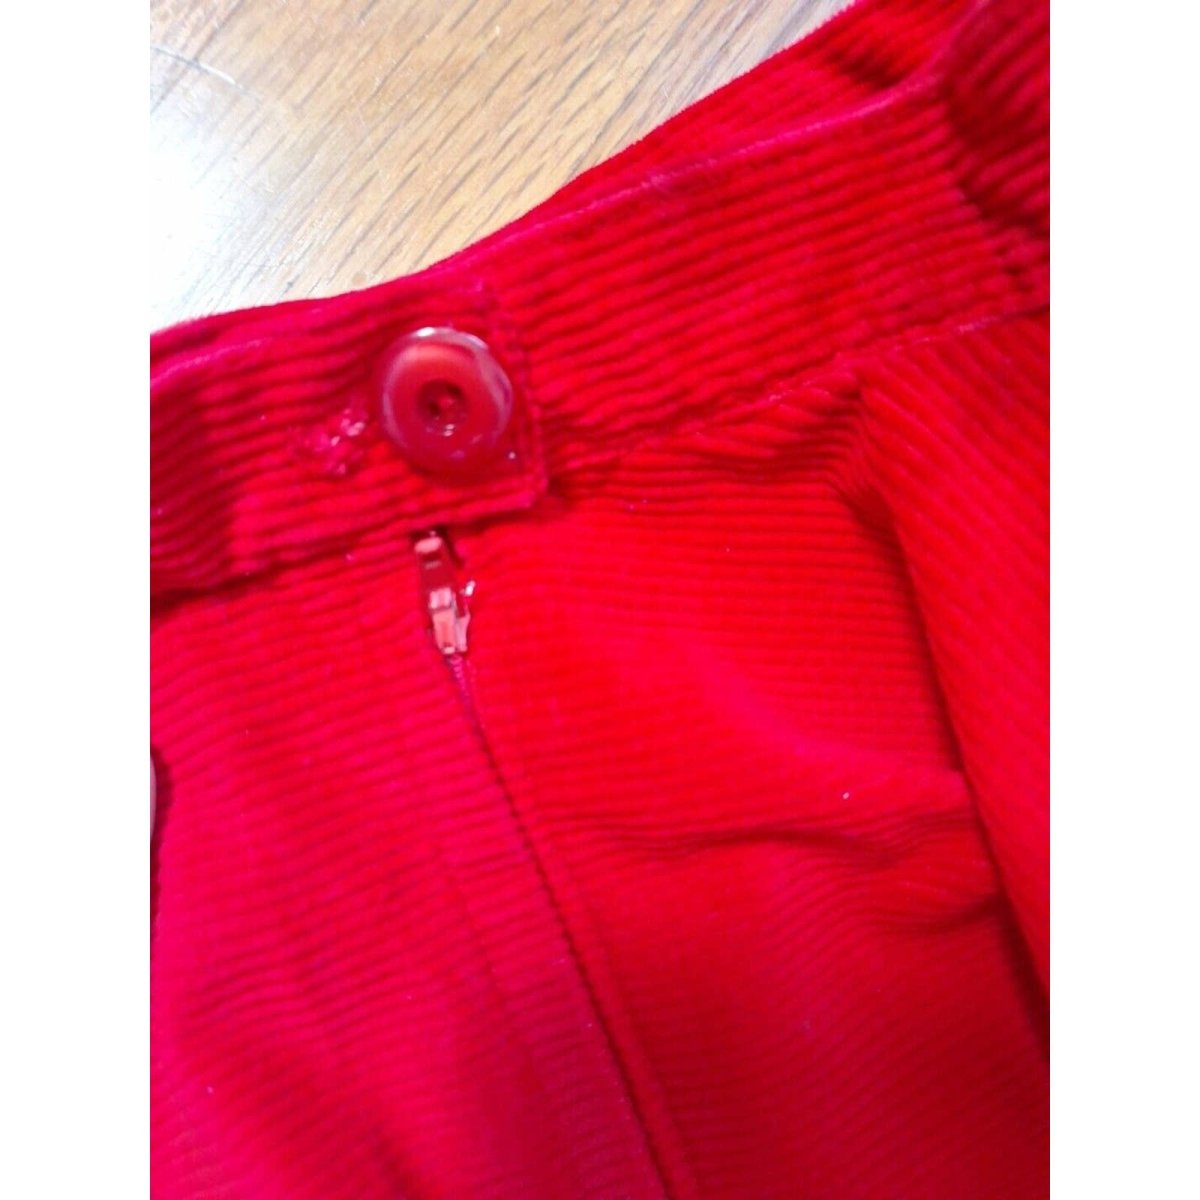 Vintage 70s Red Corduroy Full Circle Skirt AS IS Girls Size 6/6X - themallvintage The Mall Vintage